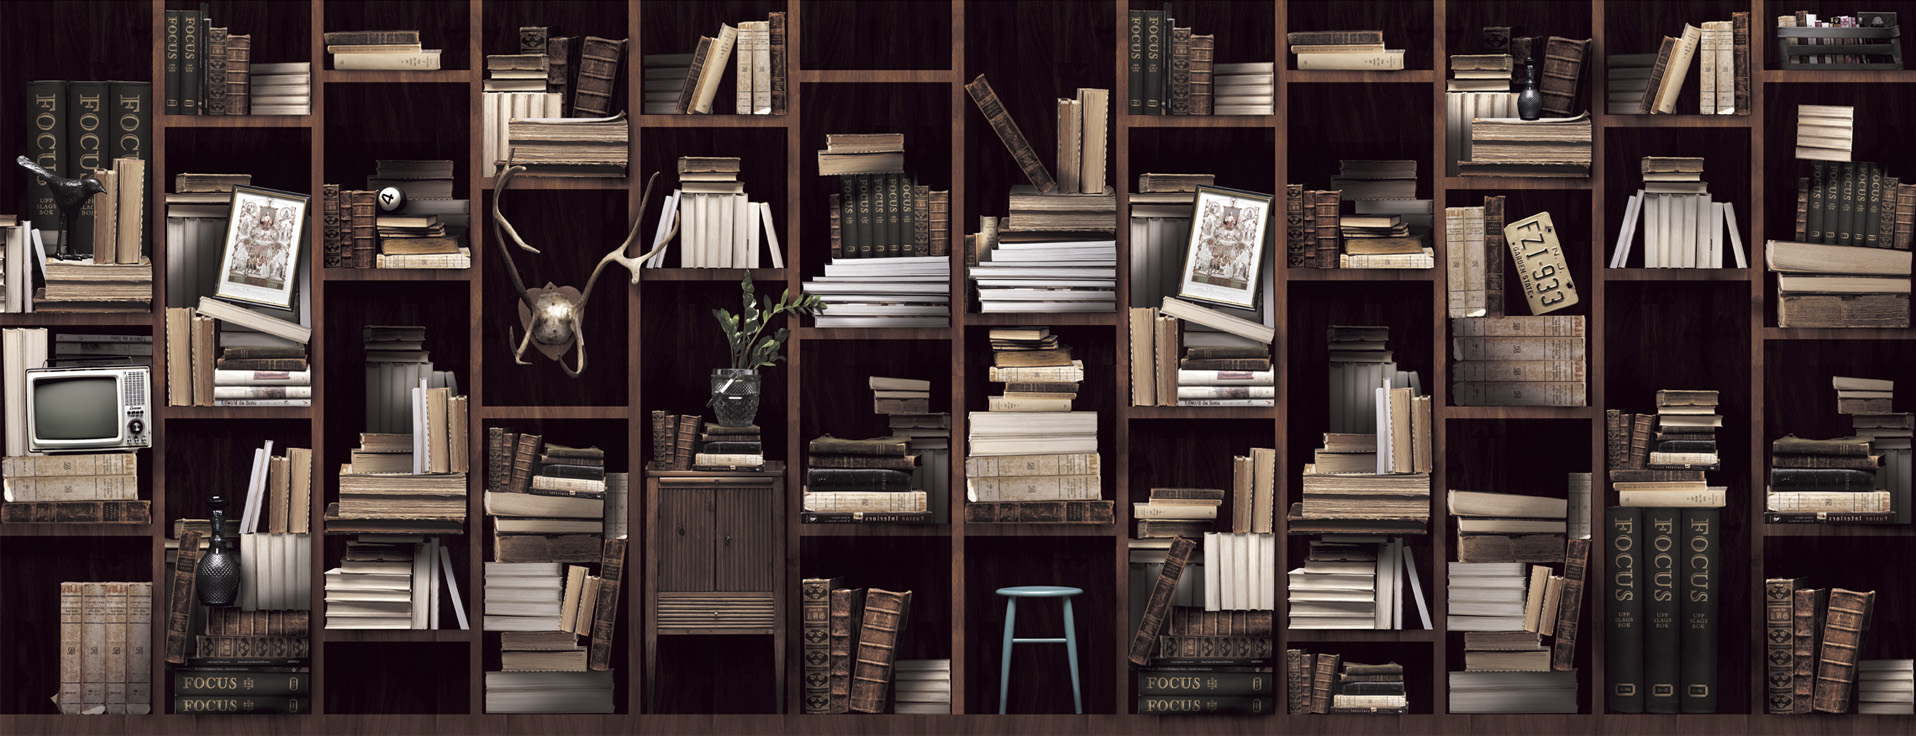 Free Download Bookshelf Bookshelves Wallpaper With Inspiration From Alice In 1916x736 For Your Desktop Mobile Tablet Explore 50 Wallpaper In Bookcases Bookshelf Wallpaper Wallpaper That Looks Like Bookshelves Library Bookcase Wallpaper